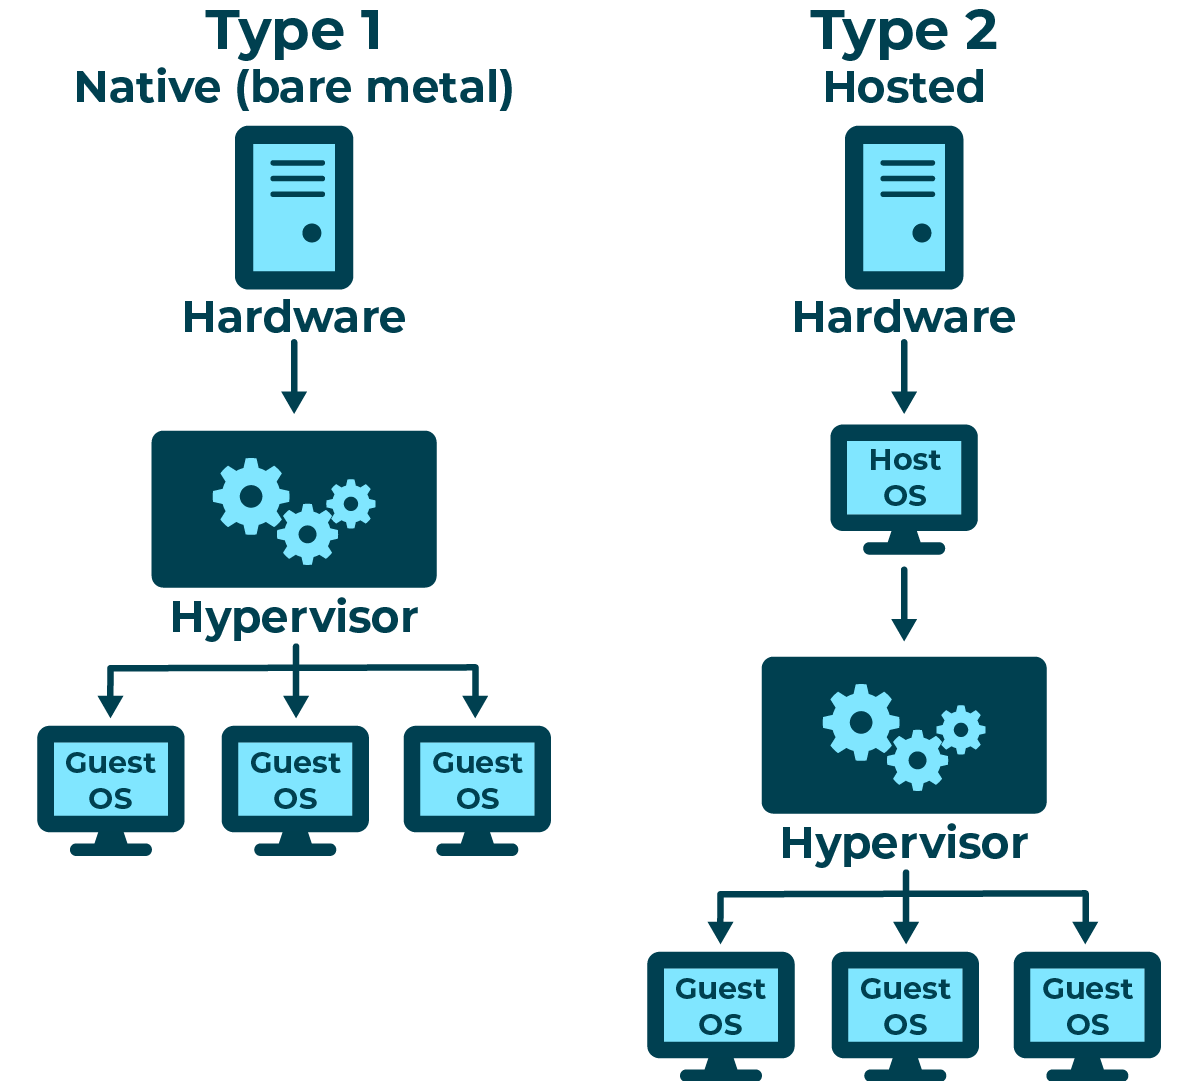 Diagram showing the difference between Type 1 and Type 2 Hypervisors, Type 1 is Native, using bare metal and via the hardware connects to the Guest OS. Type 2 is Hosted and uses a Host OS before connecting to a hypervisor which connects to Guest OS.